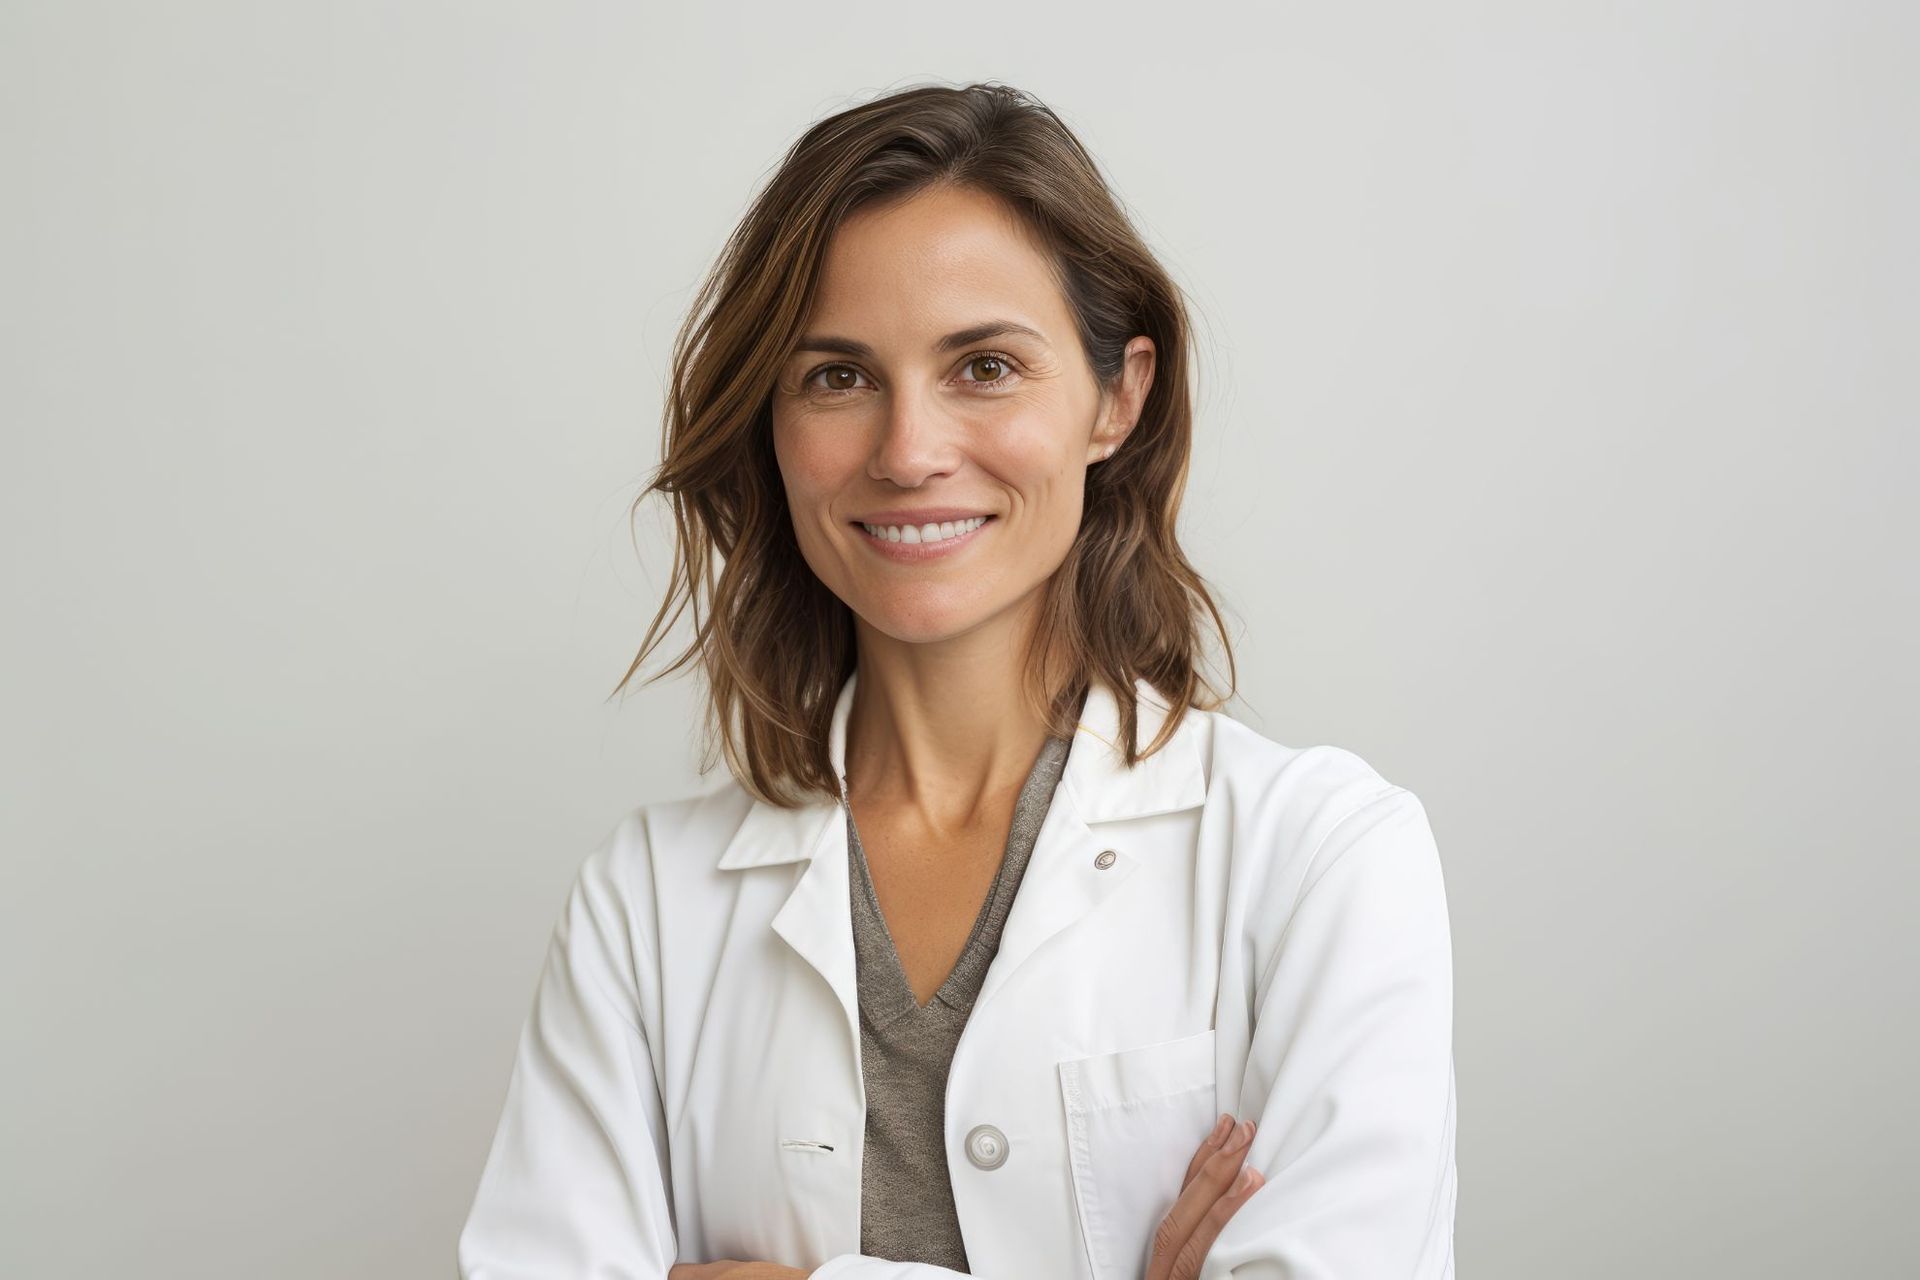 picture of a smiling white female doctor wearing a white coat